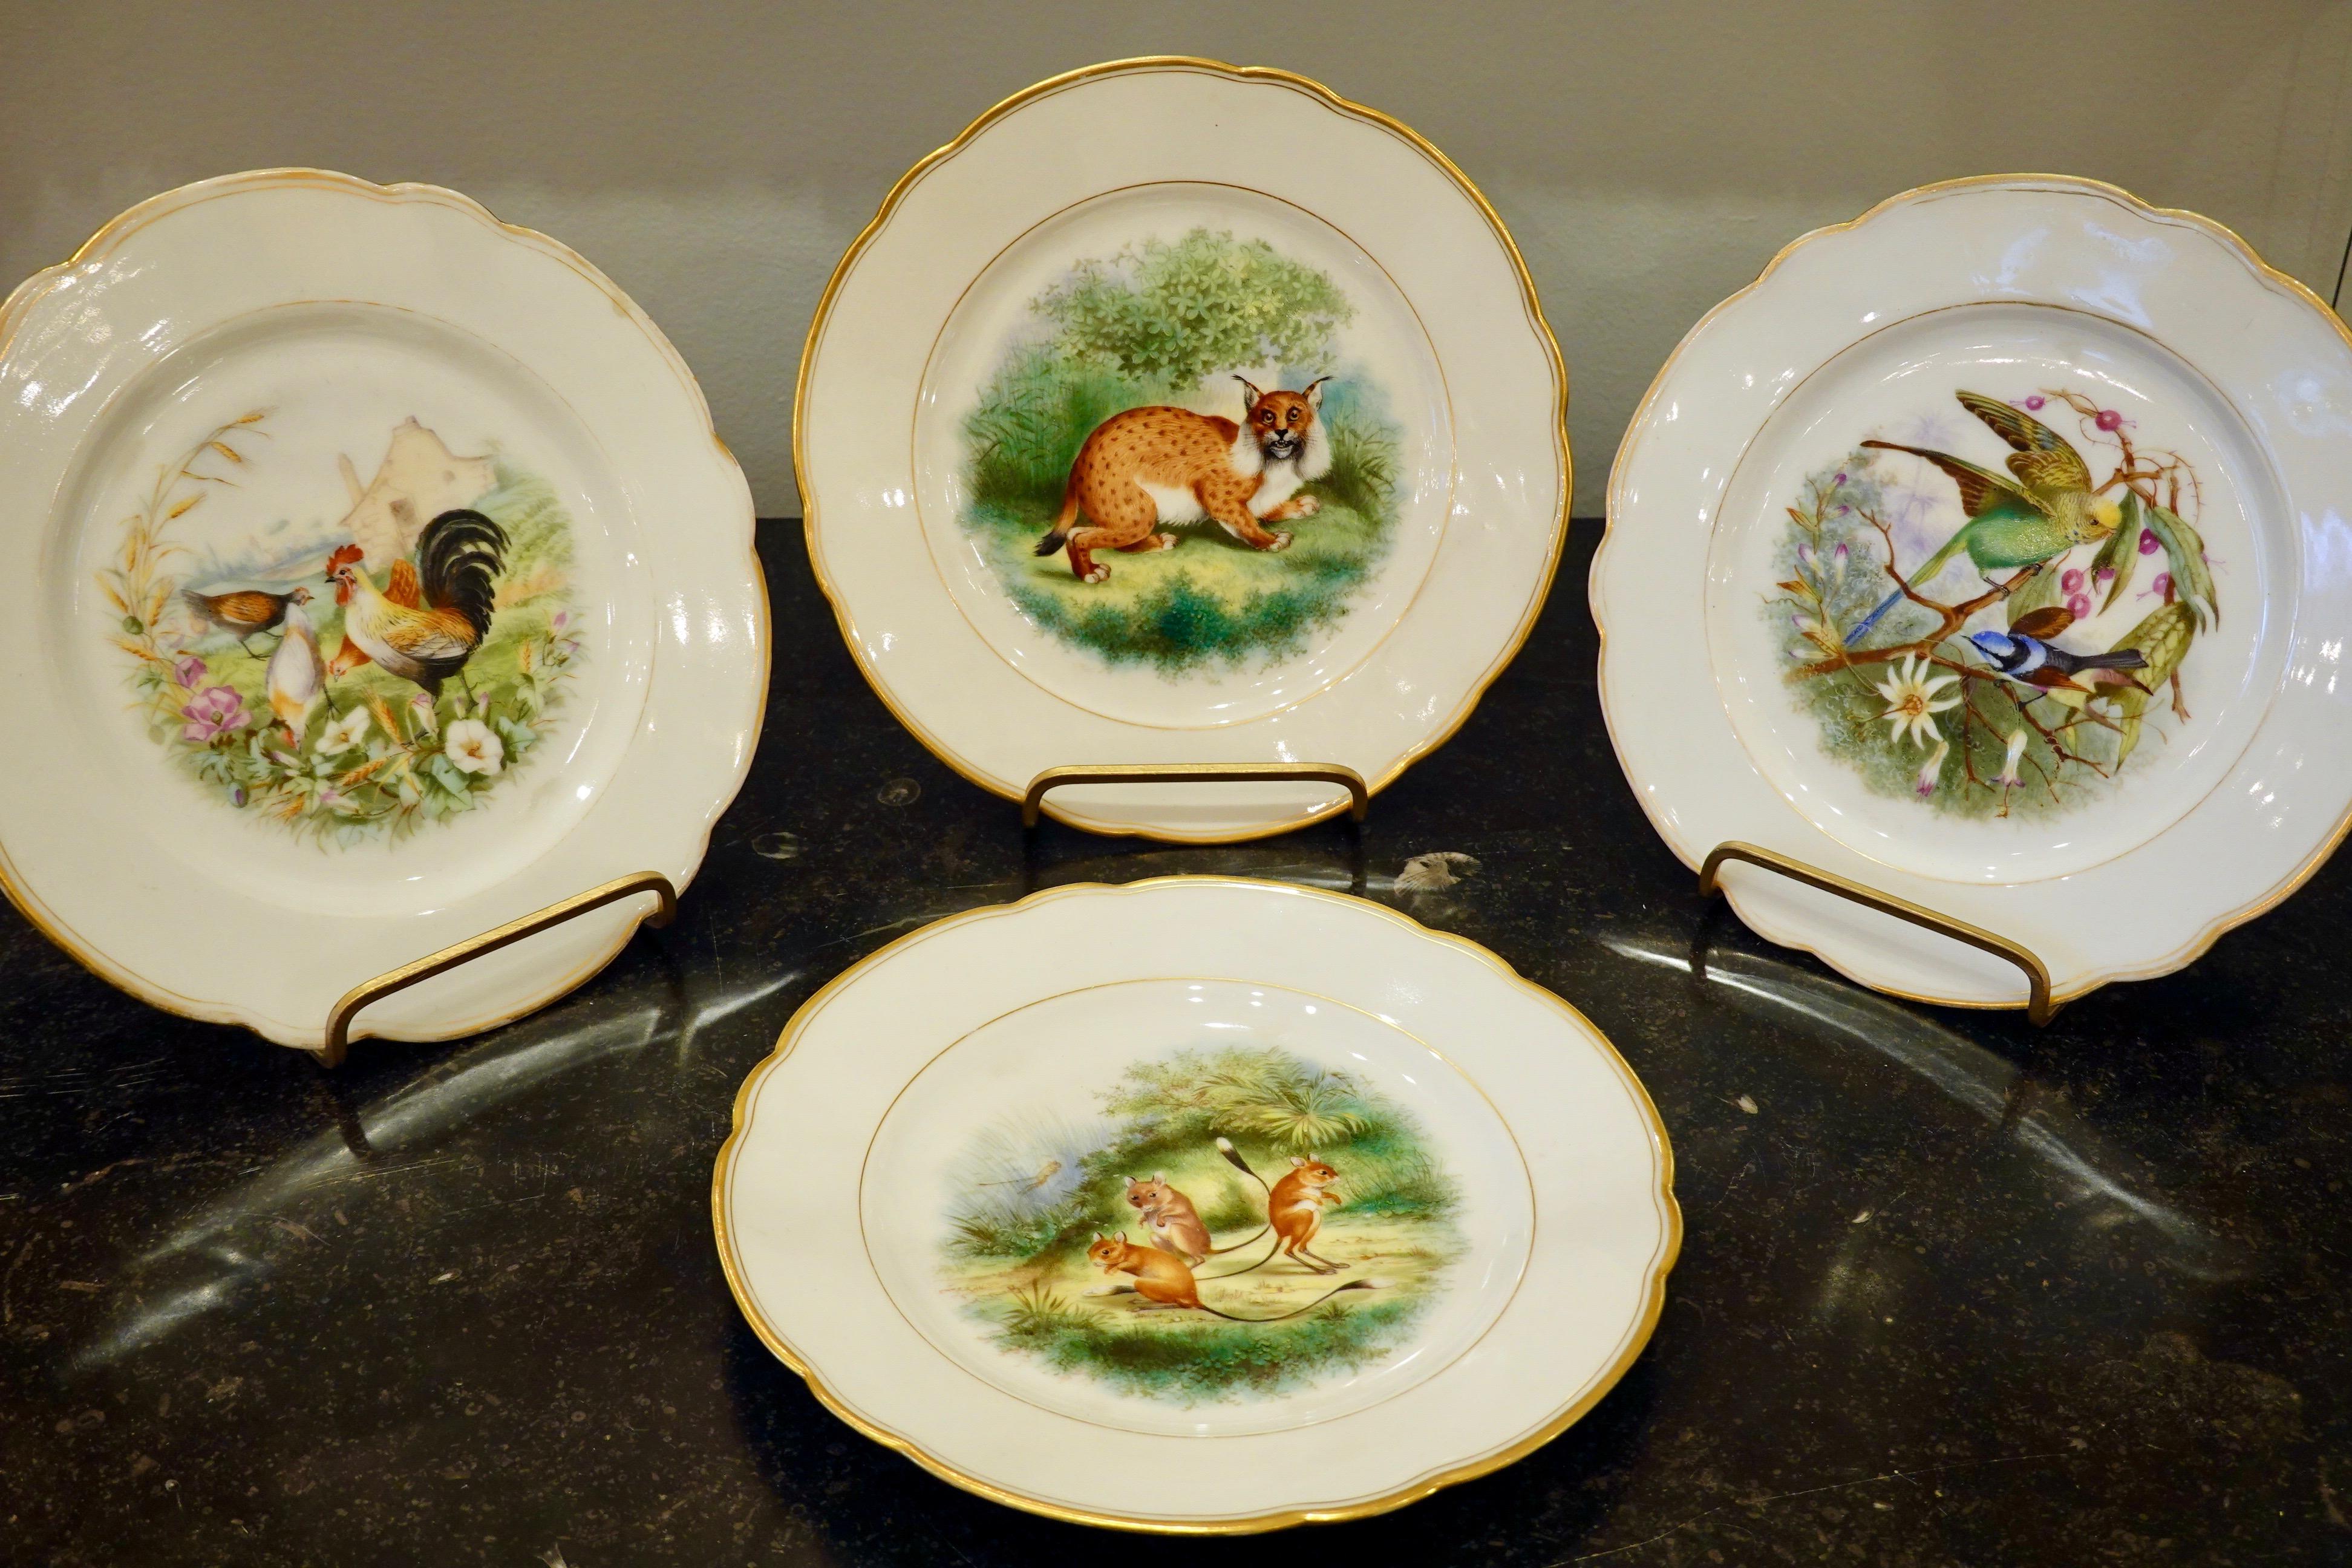 Set of six Paris porcelain scalloped plates with hand-painted scenes of birds and animals set in fanciful or pastoral environments, some with castles. Scenes include a lynx in a forest, parakeets with orchids, peacocks with a castle, mice playing, a